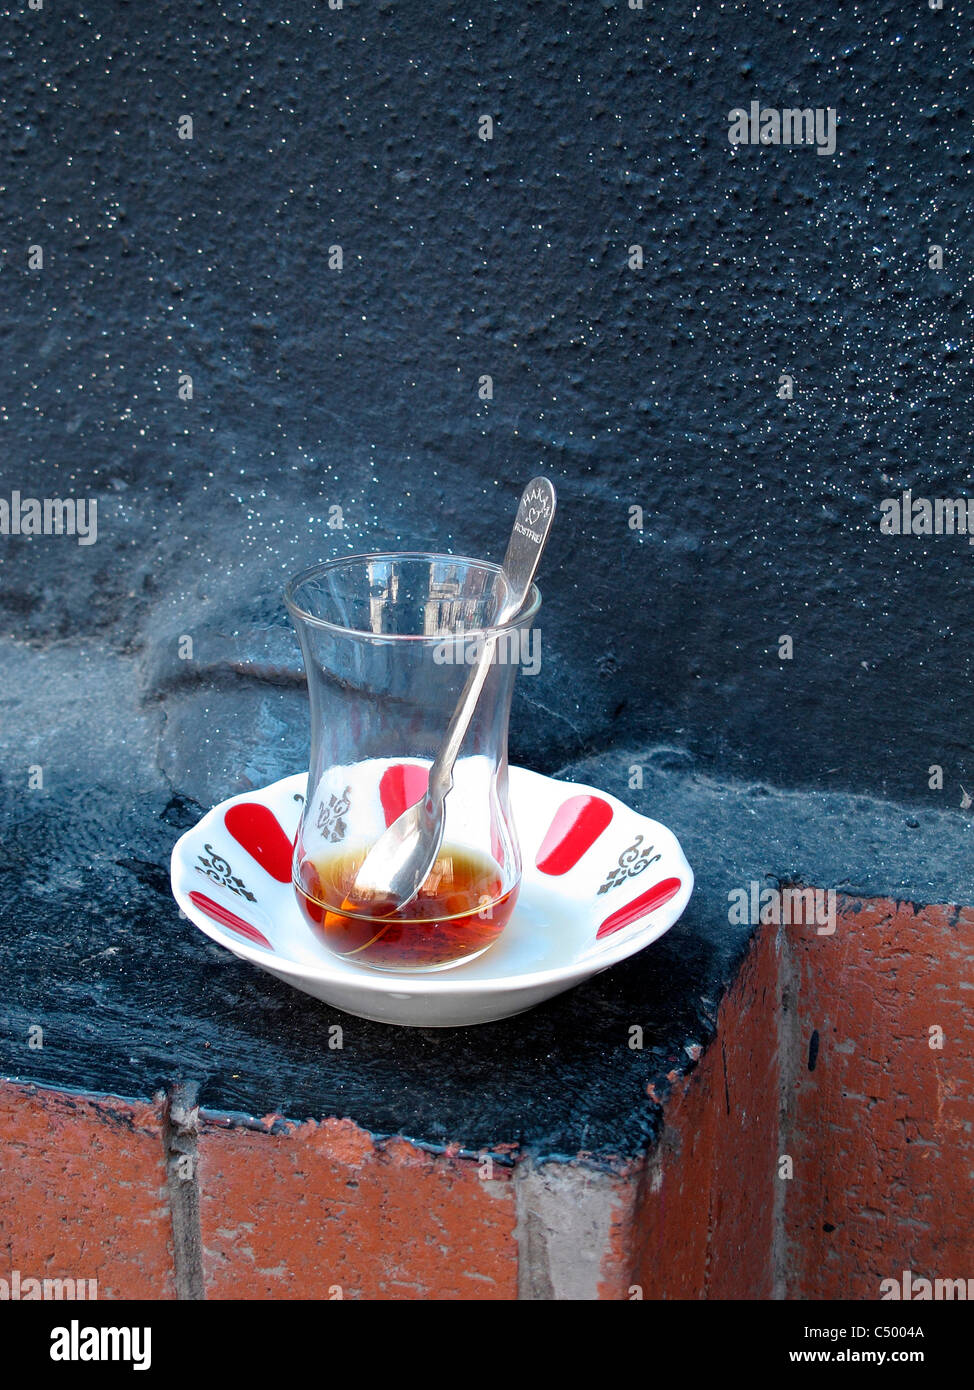 Turkey Istanbul Sultanahmet old town tea cup to be pickup Stock Photo